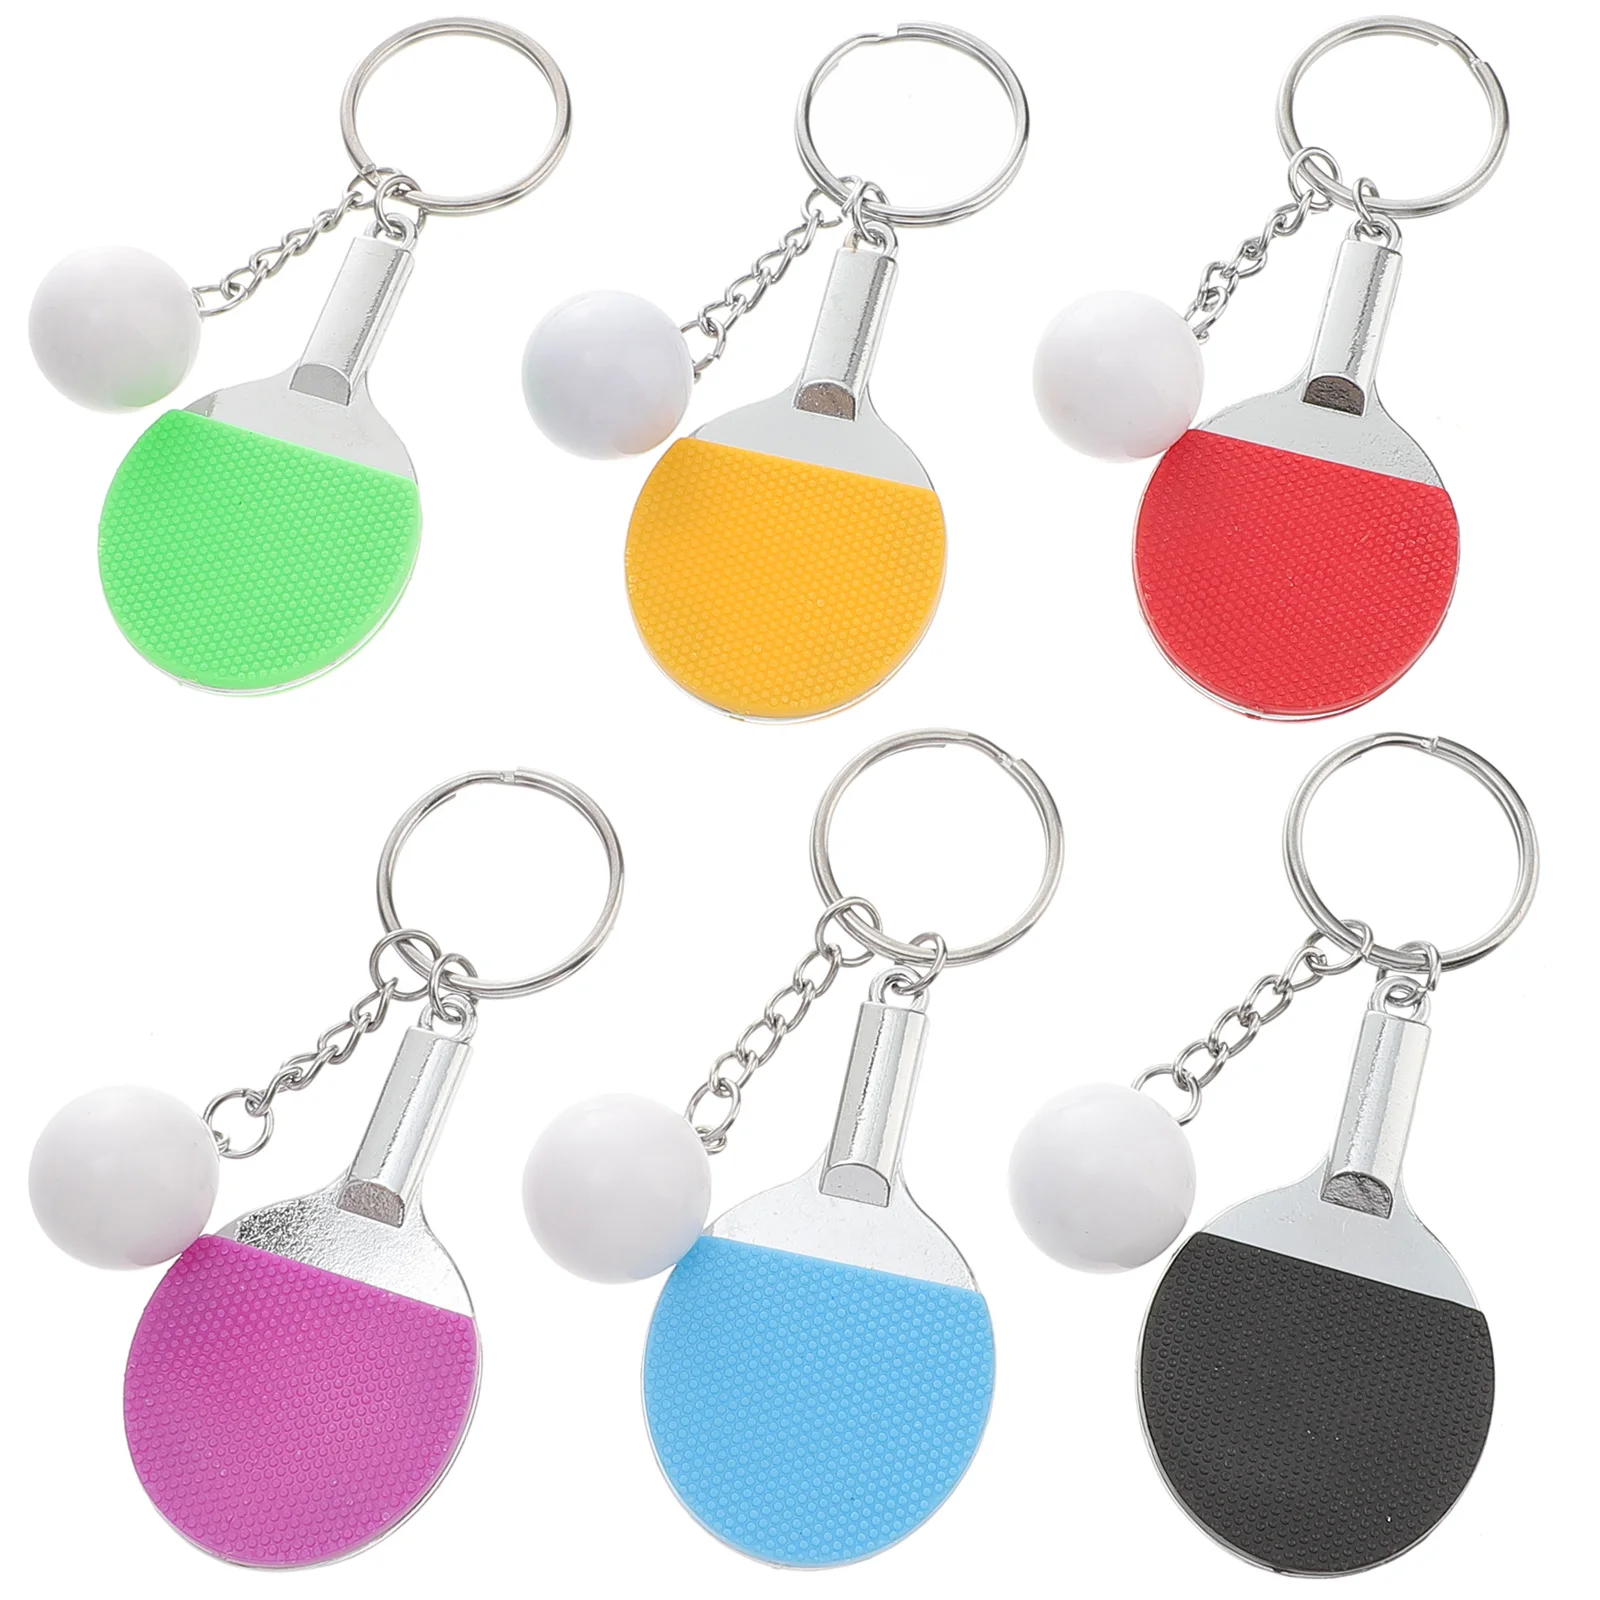 

6 Pcs Racket Keychain Hanging Decoration Backpack Keychains Sports Meeting Favors Mini Ring Bag